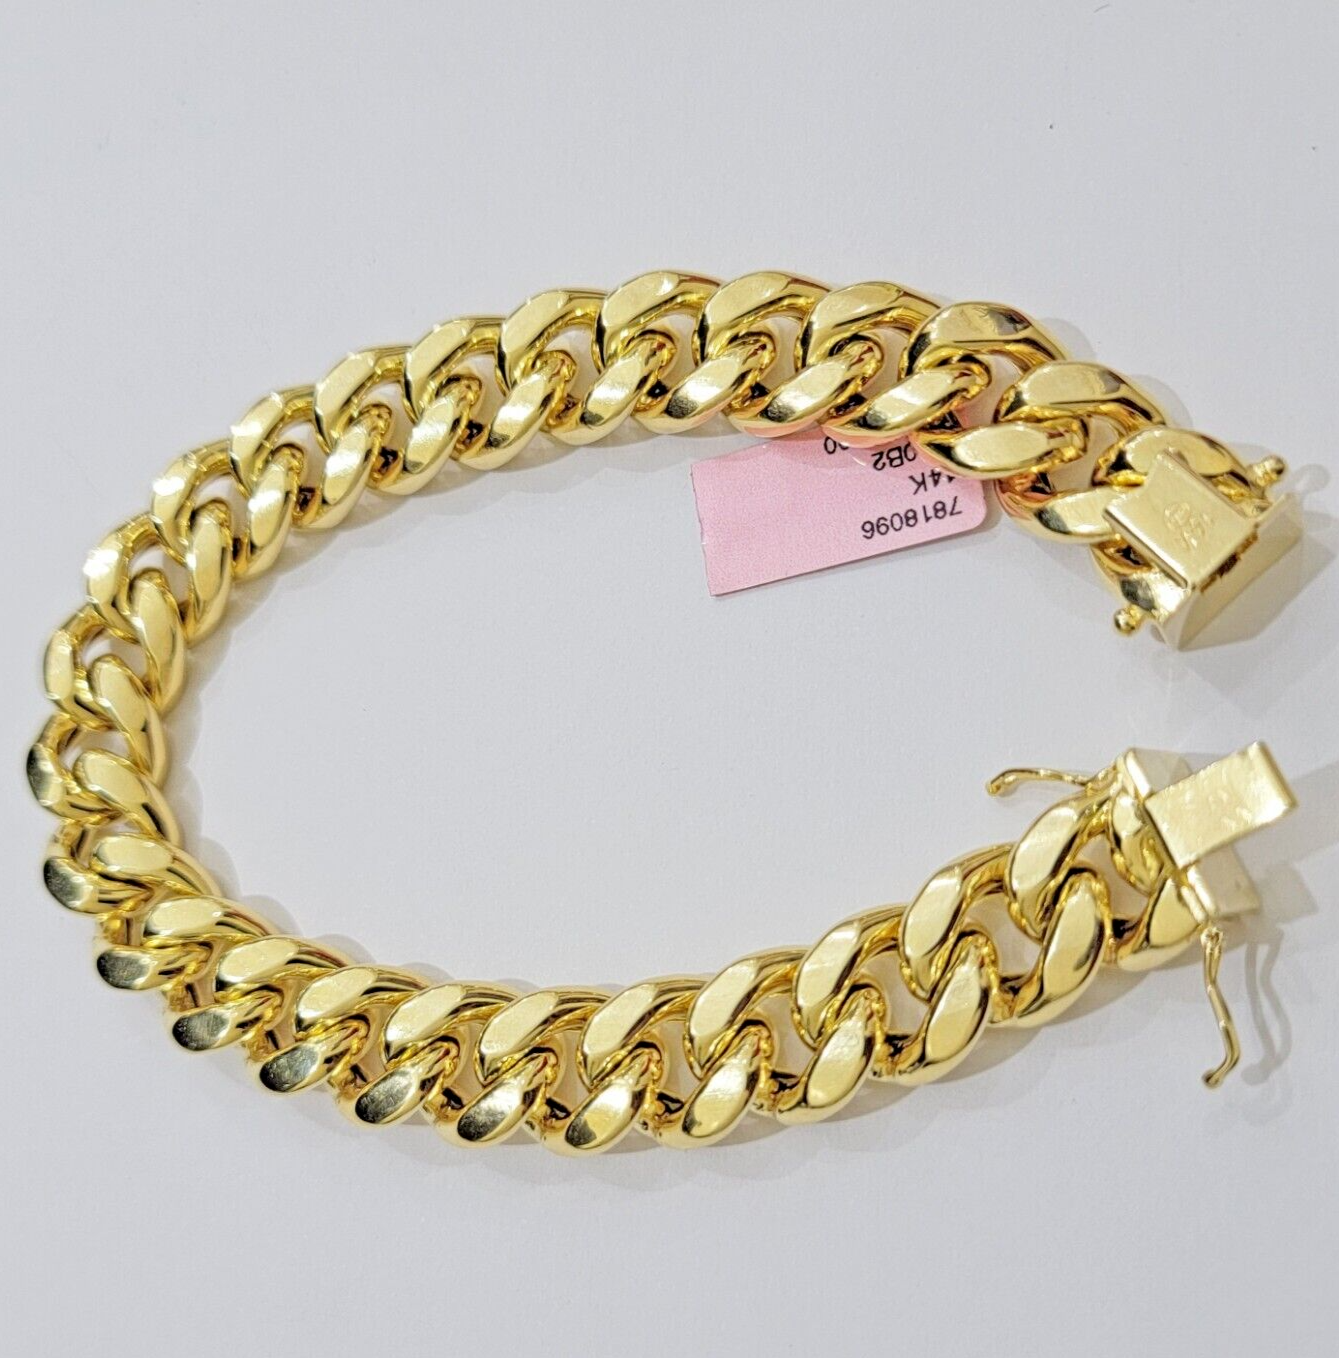 Buy 10k Yellow Gold Solid Miami Bracelet 8 Inch 5mm Online at SO ICY JEWELRY